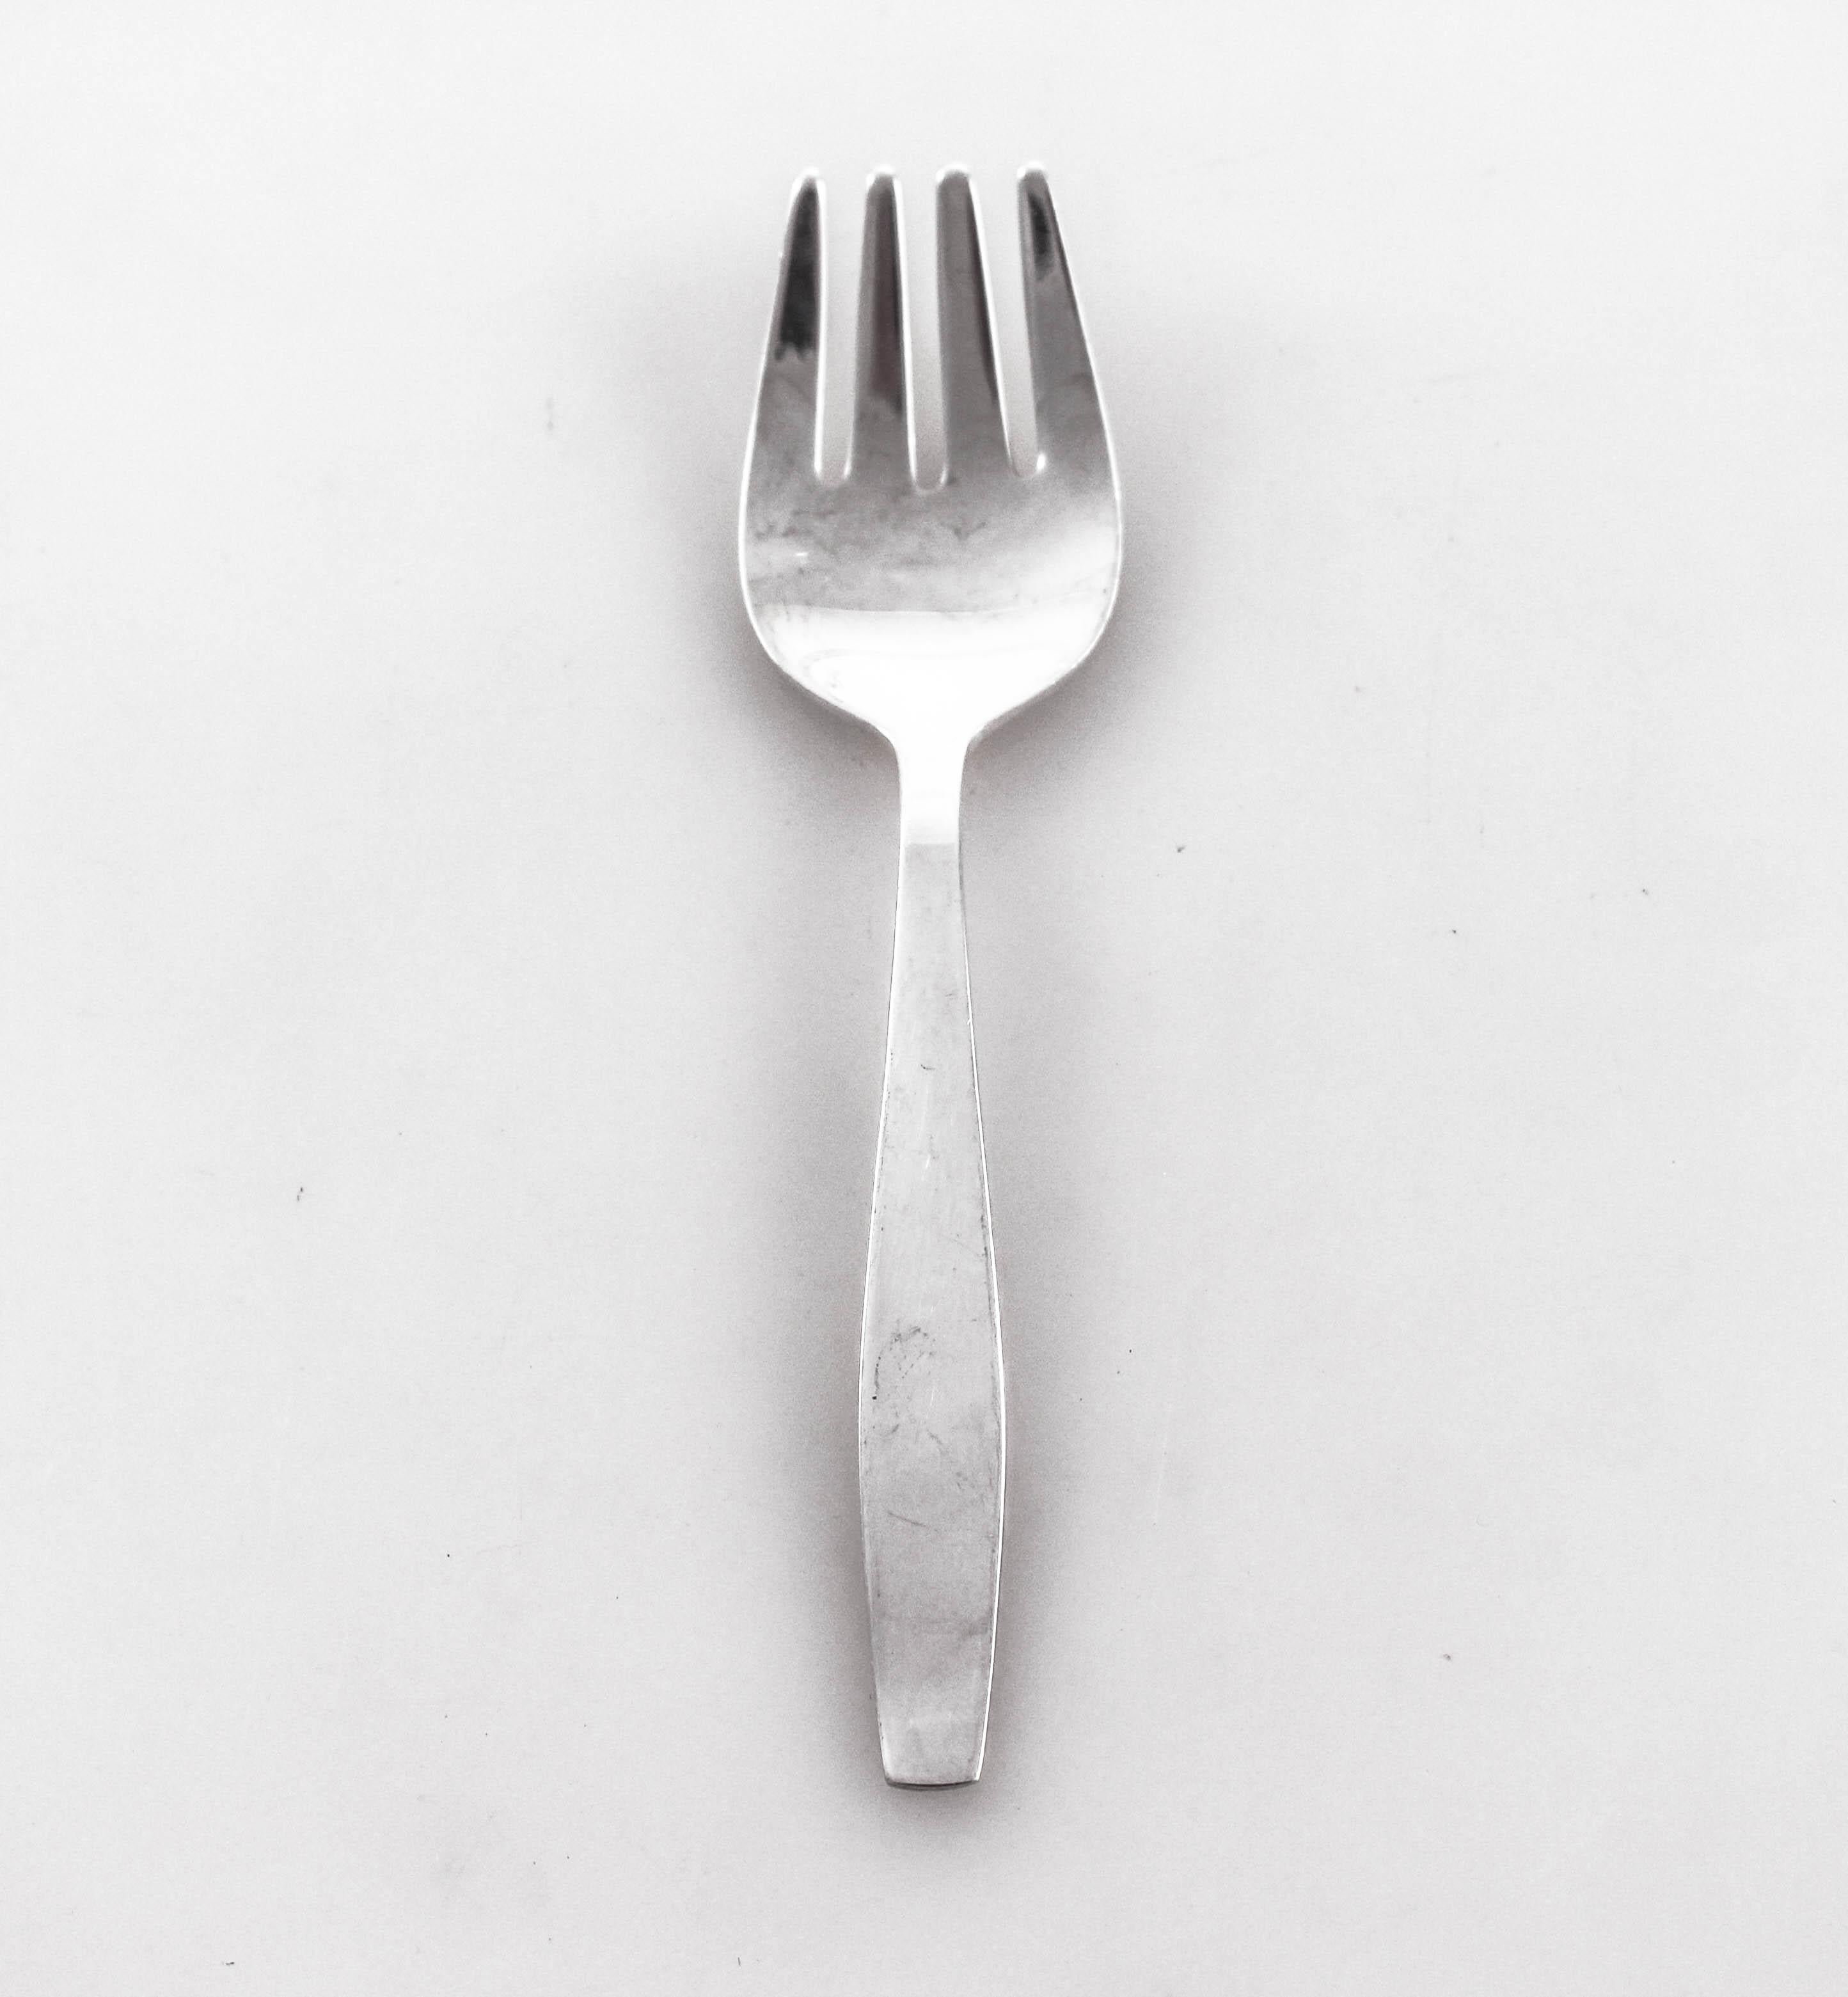 We are proud to offer this sterling silver baby fork and spoon set made by Towle Silversmiths. A very sleek modernist curved shape, the look was very ahead of its time. It's the perfect gift for either a boy or girl (unisex). The pattern is